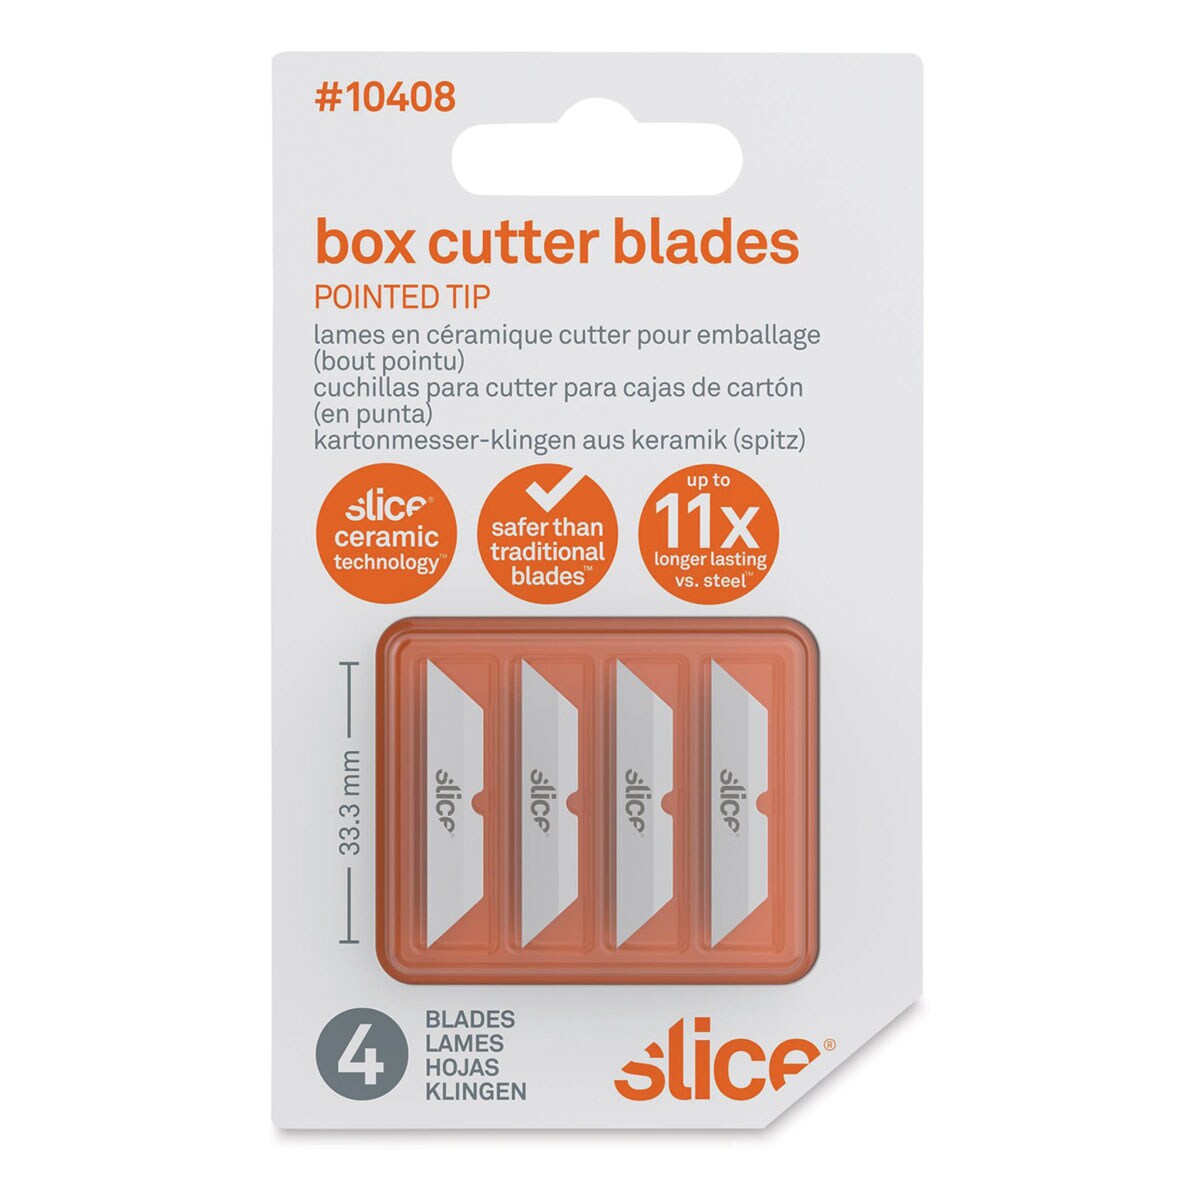 Slice Box Cutter Replacement Blades - Pkg of 4, Pointed Tip